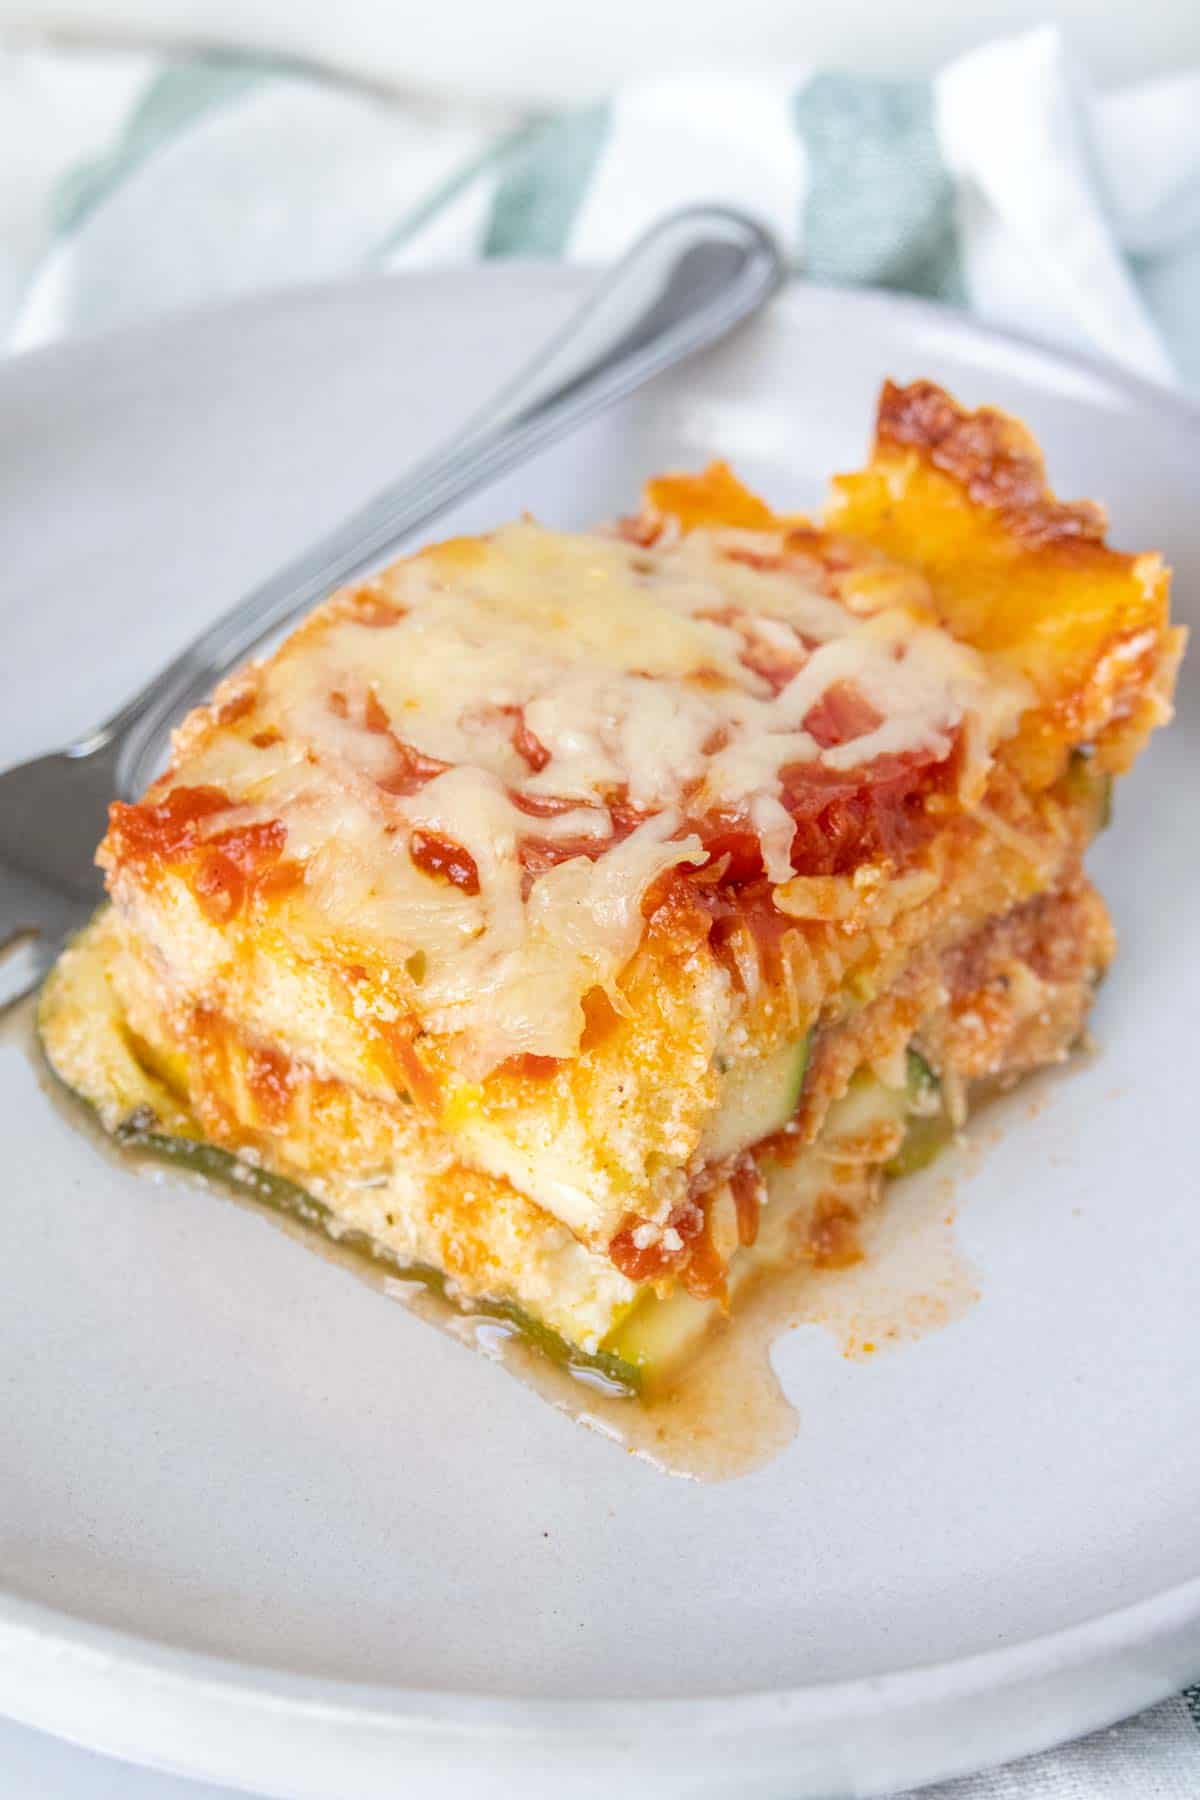 Gray plate with a slice of zucchini lasagna and a fork.